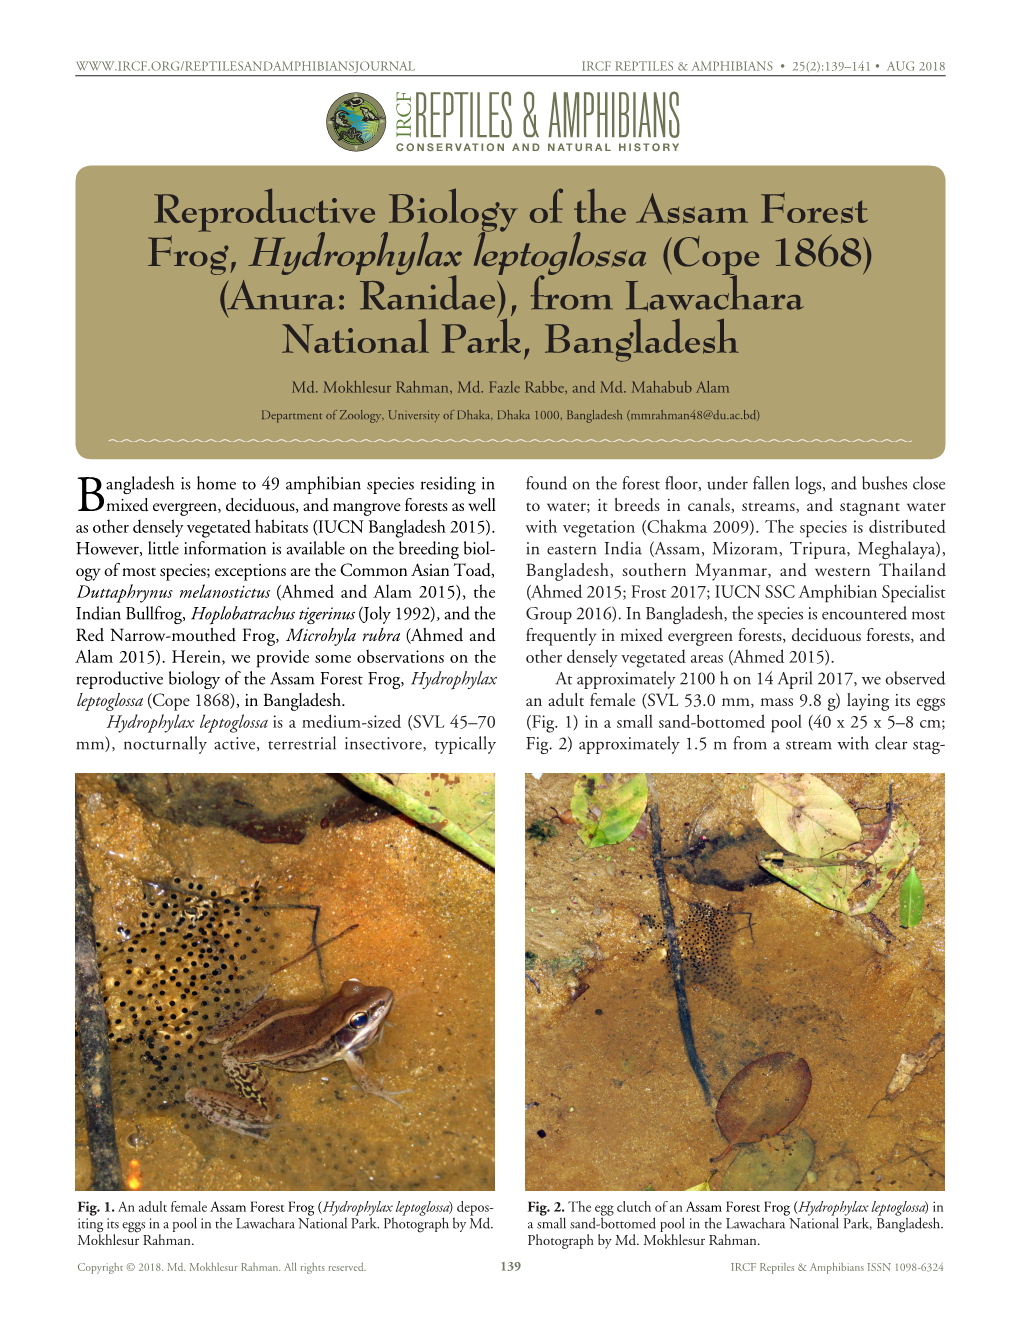 Reproductive Biology of the Assam Forest Frog, Hydrophylax Leptoglossa